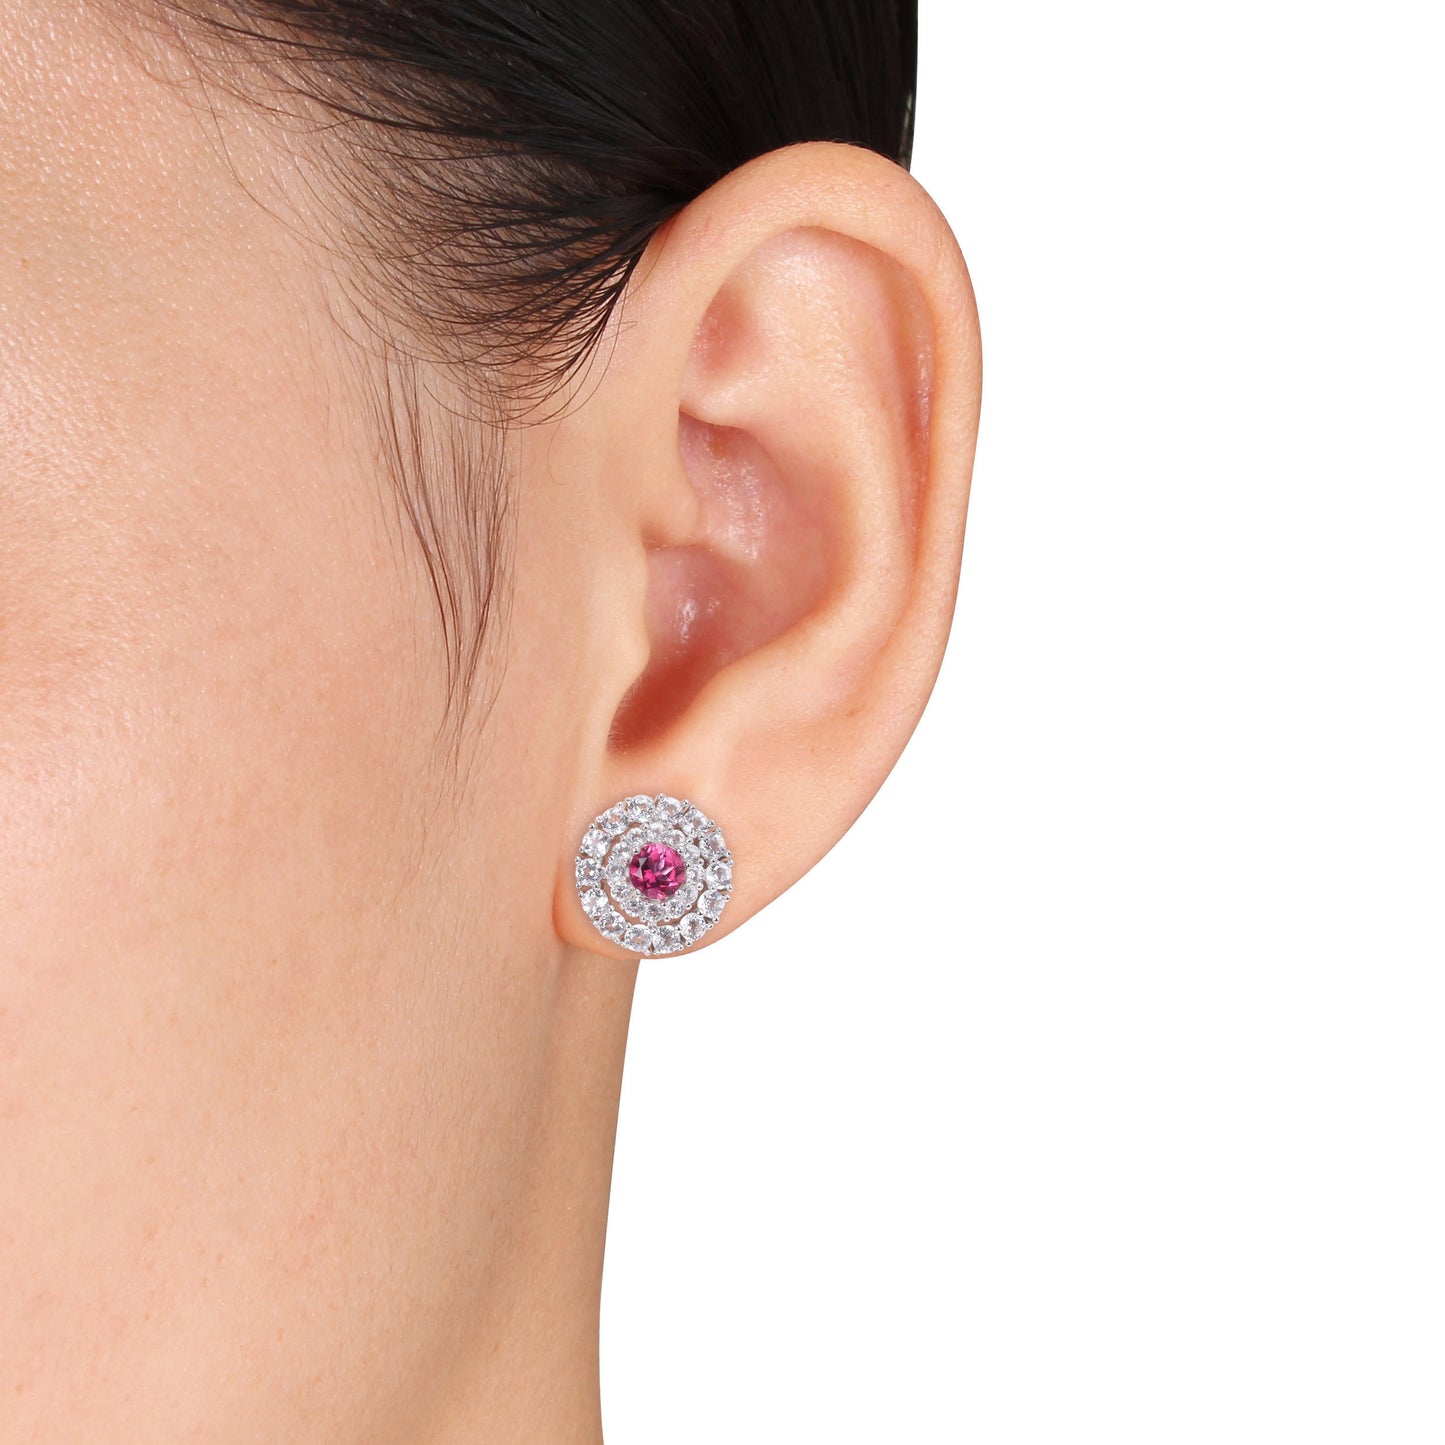 Pink and White Topaz Double Halo Stud Earrings